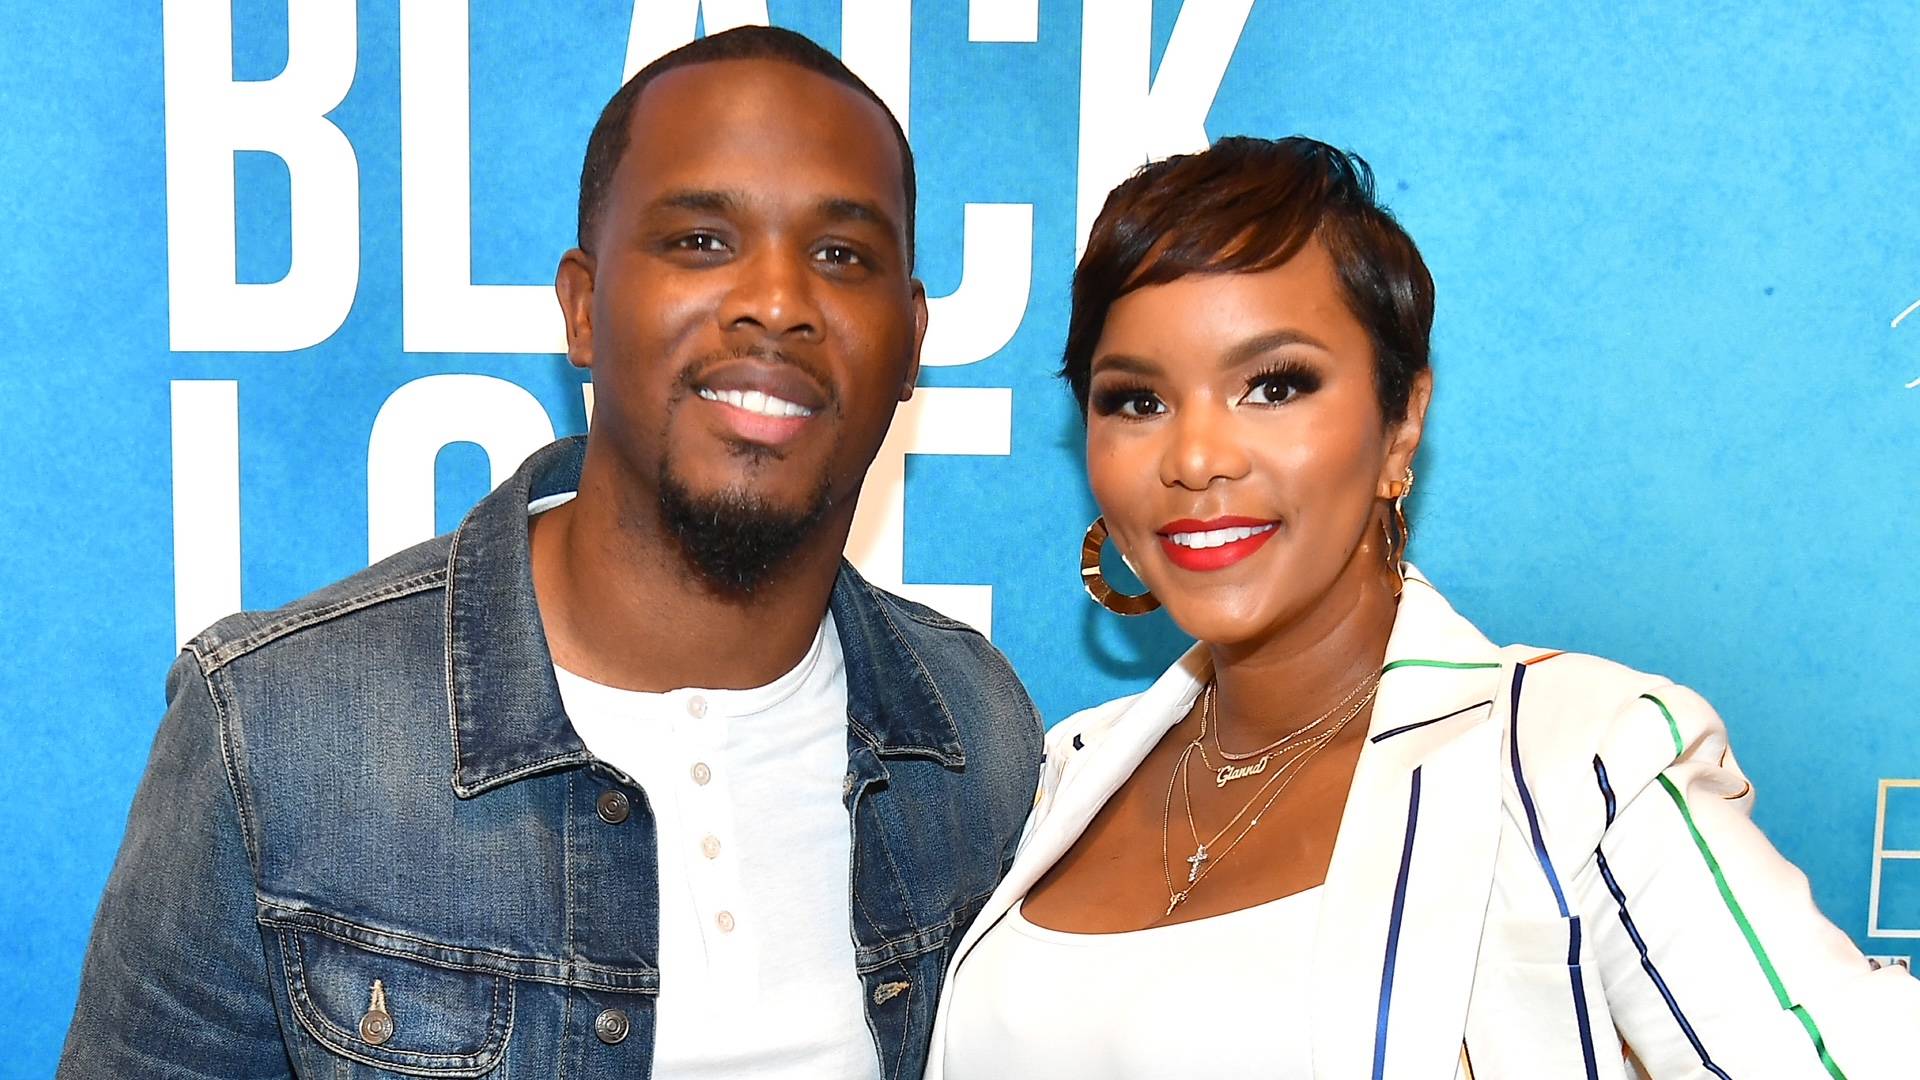 LeToya Luckett and Tommicus Walker on BET Buzz 2021.